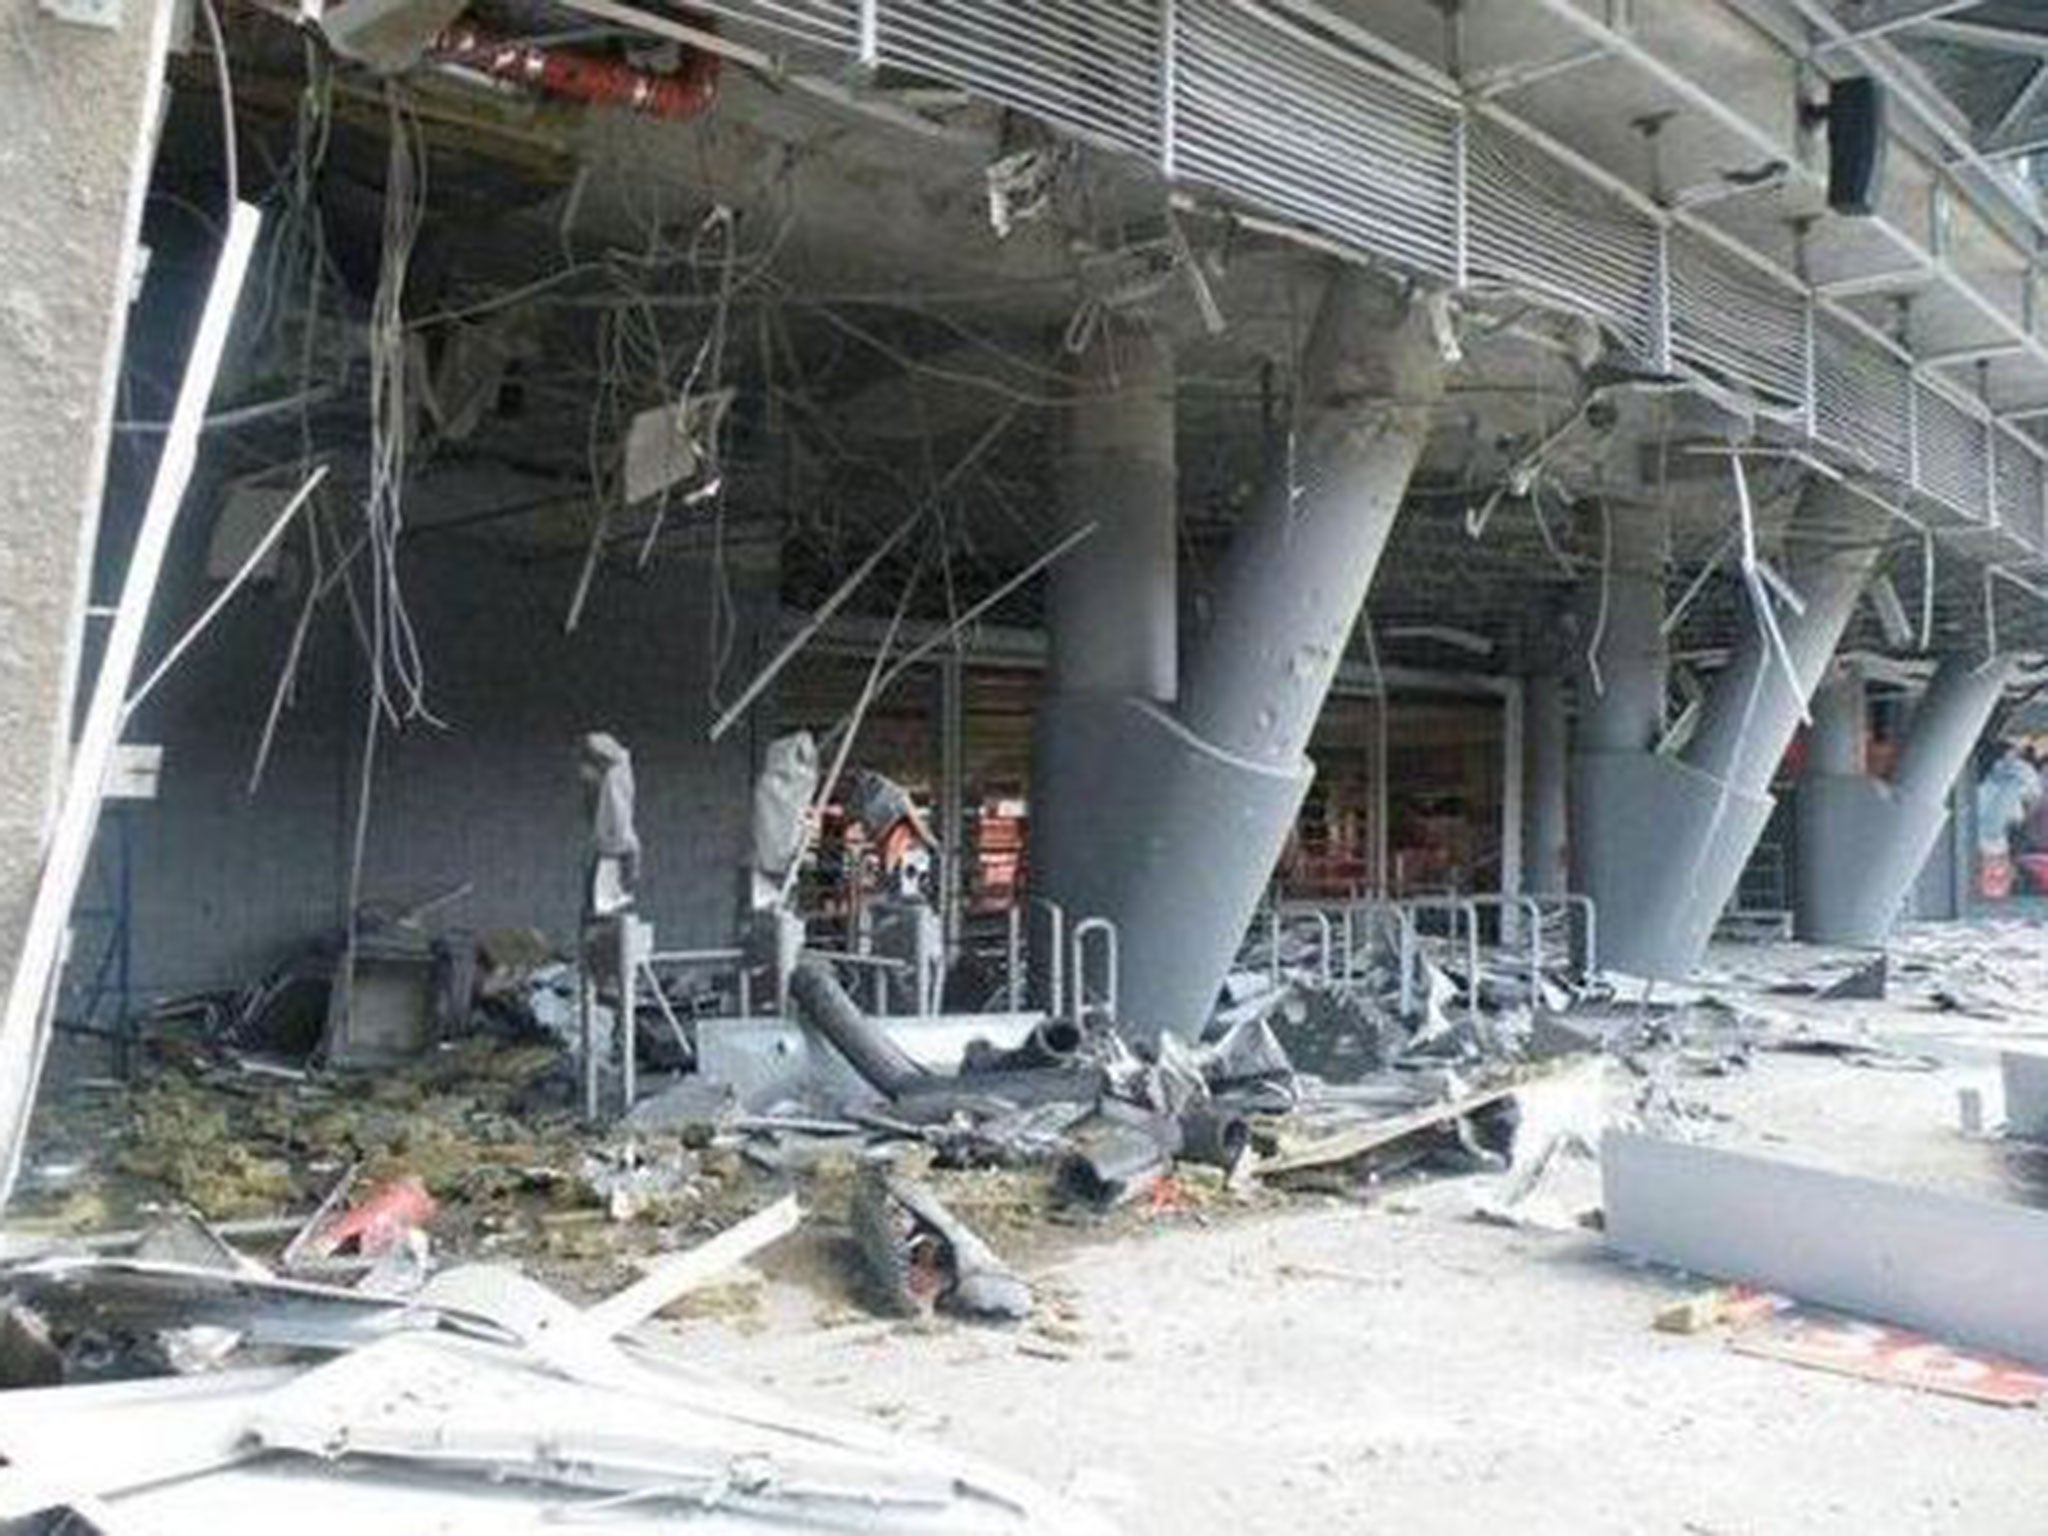 Shakhtar Donetsk's Donbass Arena was hit by two explosions early this morning with the city serving as a battleground between national forces and pro-Russian separatists.